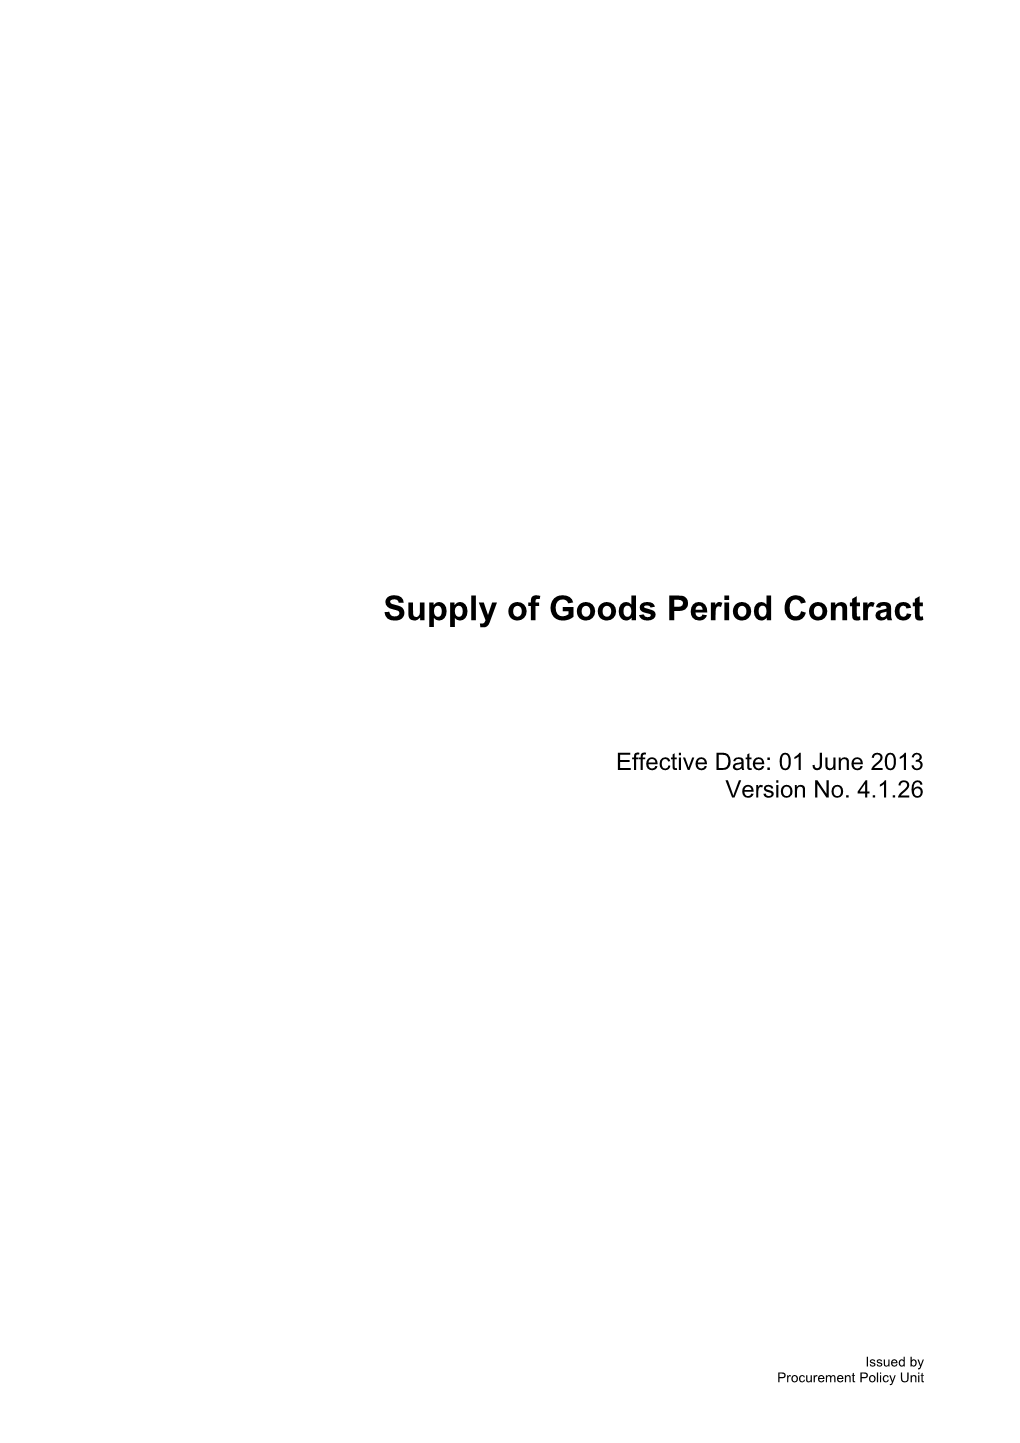 Supply of Goods Period - V 4.1.26 (01 June 2013)